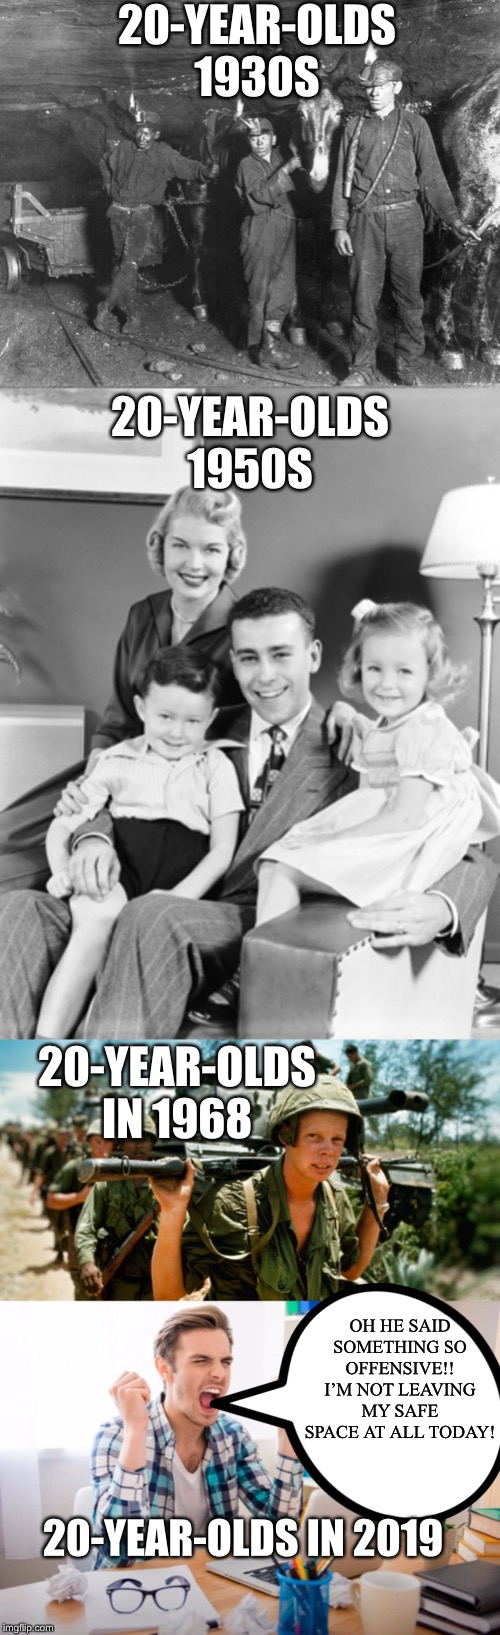 20-YEAR-OLDS 1930S; 20-YEAR-OLDS 1950S; 20-YEAR-OLDS IN 1968; OH HE SAID SOMETHING SO OFFENSIVE!! I’M NOT LEAVING MY SAFE SPACE AT ALL TODAY! 20-YEAR-OLDS IN 2019 | image tagged in snowflakes,special snowflake,college liberal,liberal logic,words that offend liberals,libtards | made w/ Imgflip meme maker